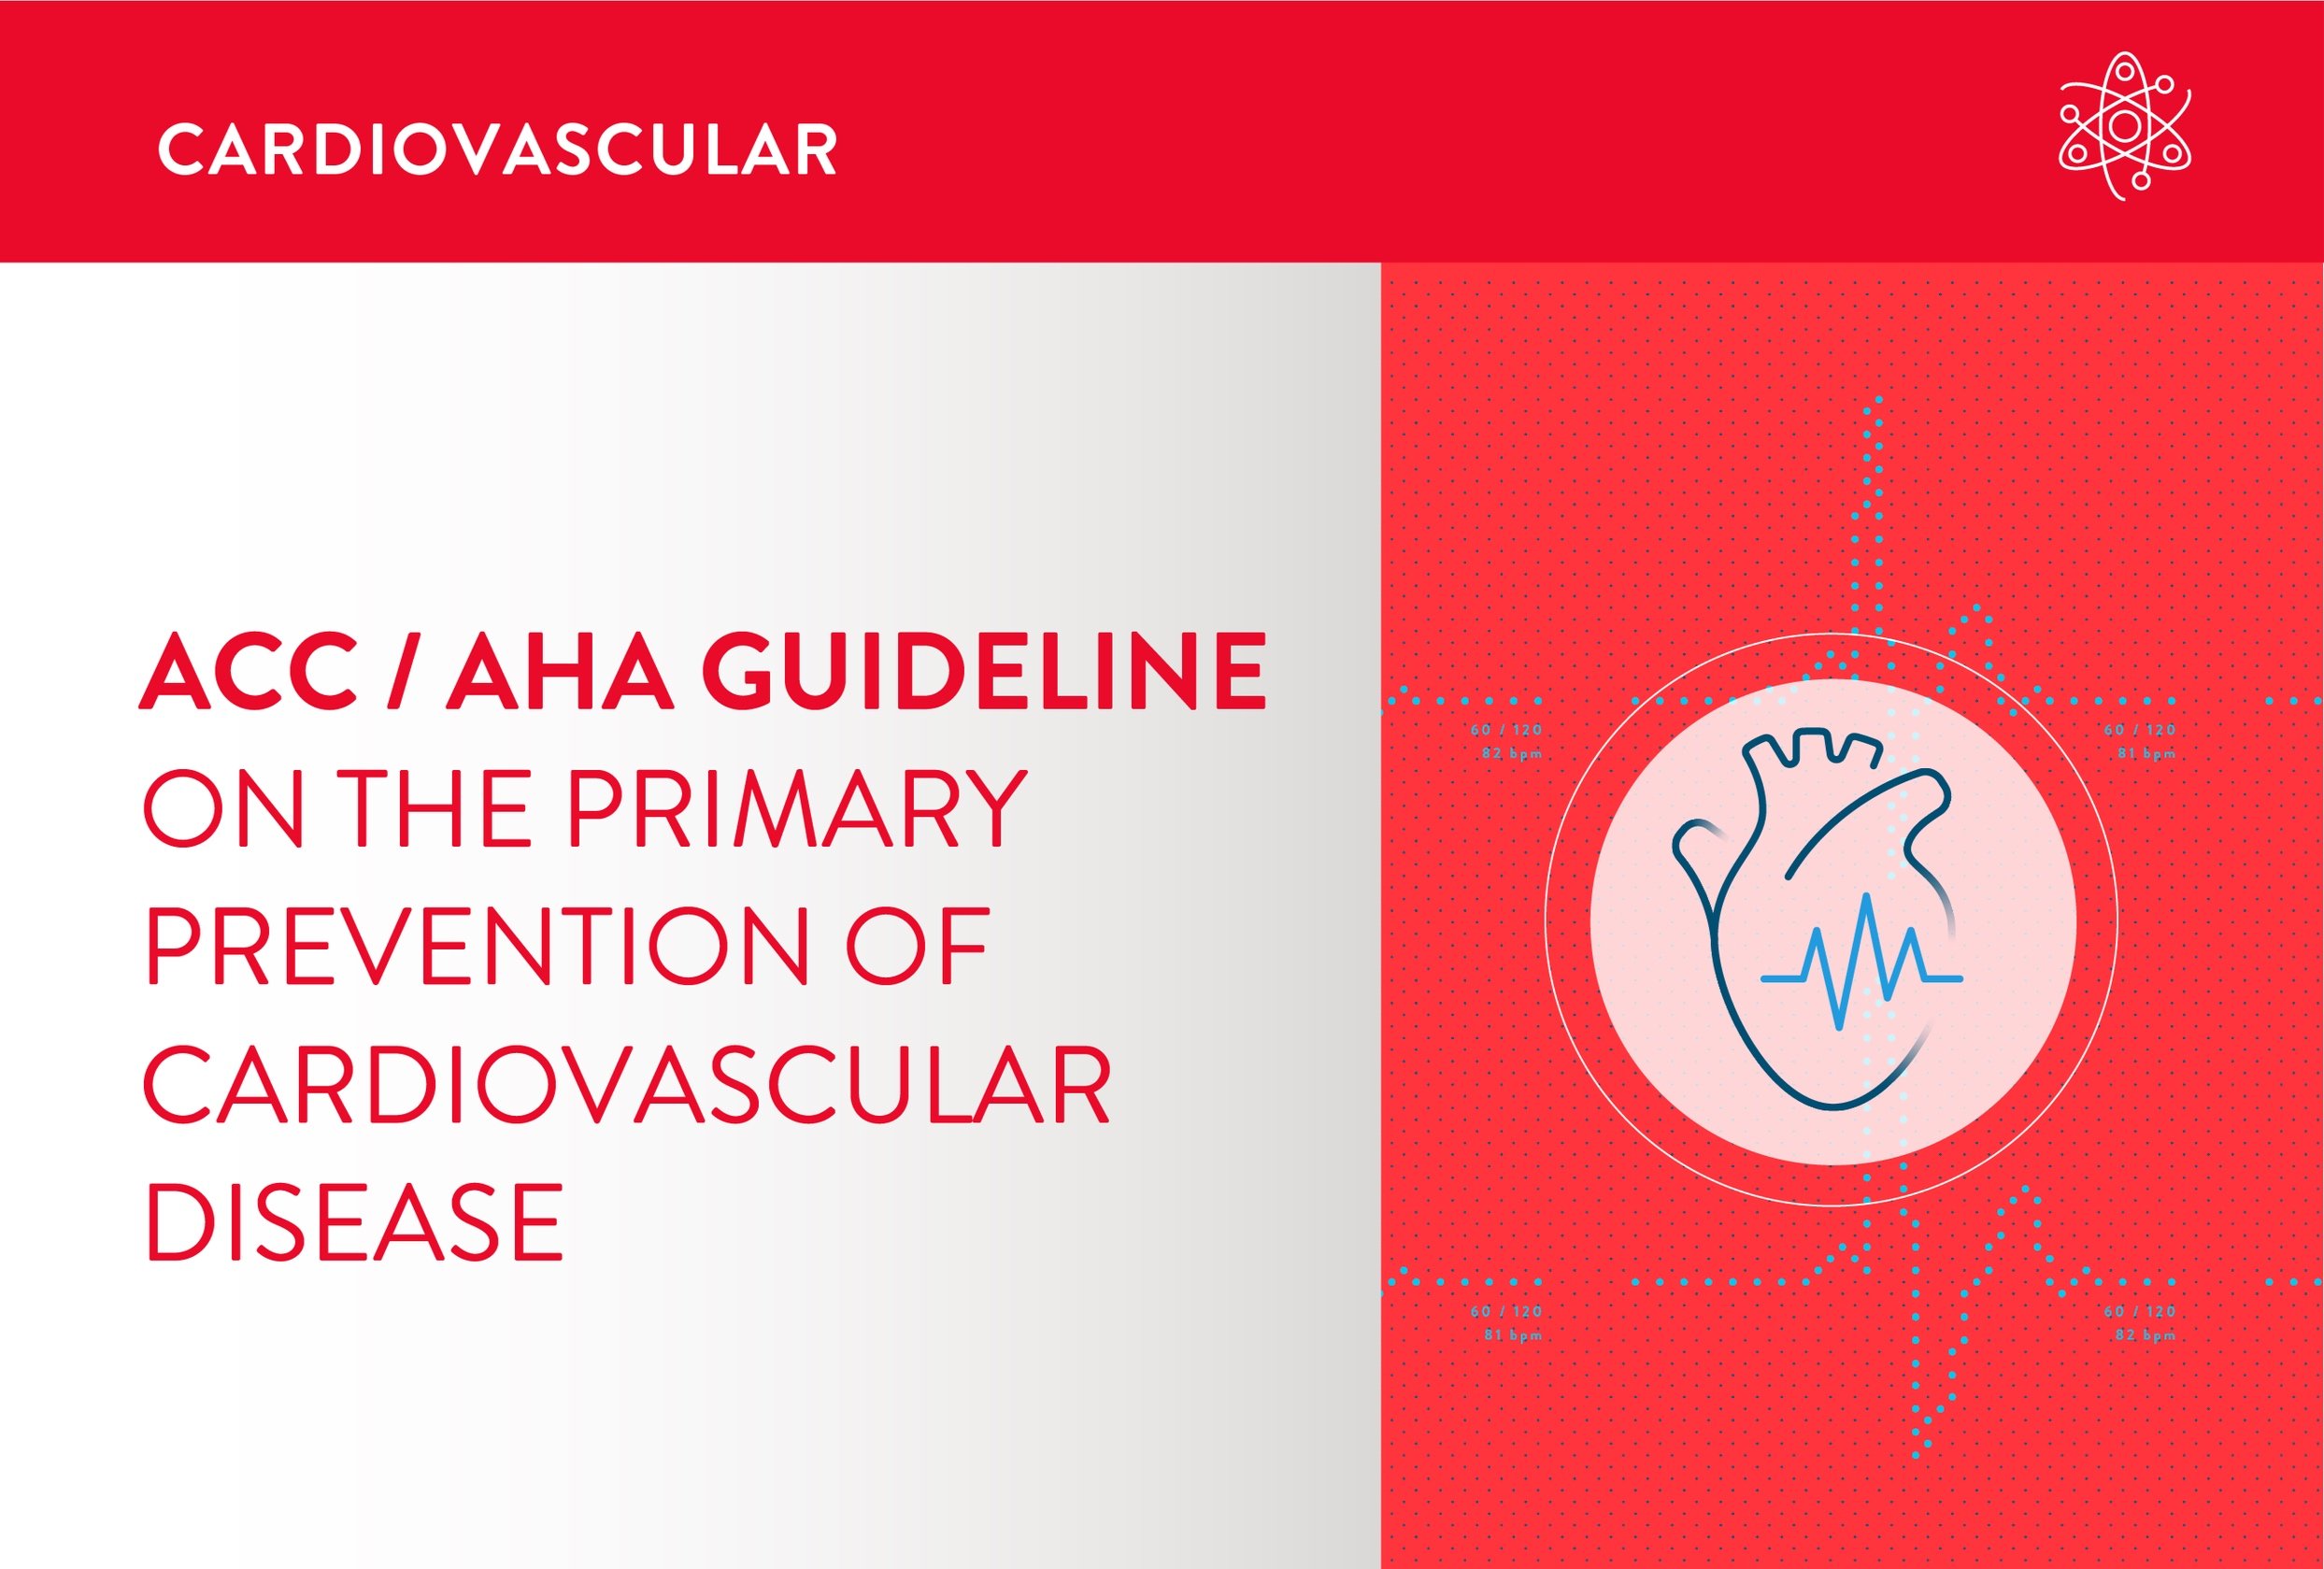 Visual_COL-08880_ACC_AHA+guideline+on+primary+prevention+of+CVD.jpg